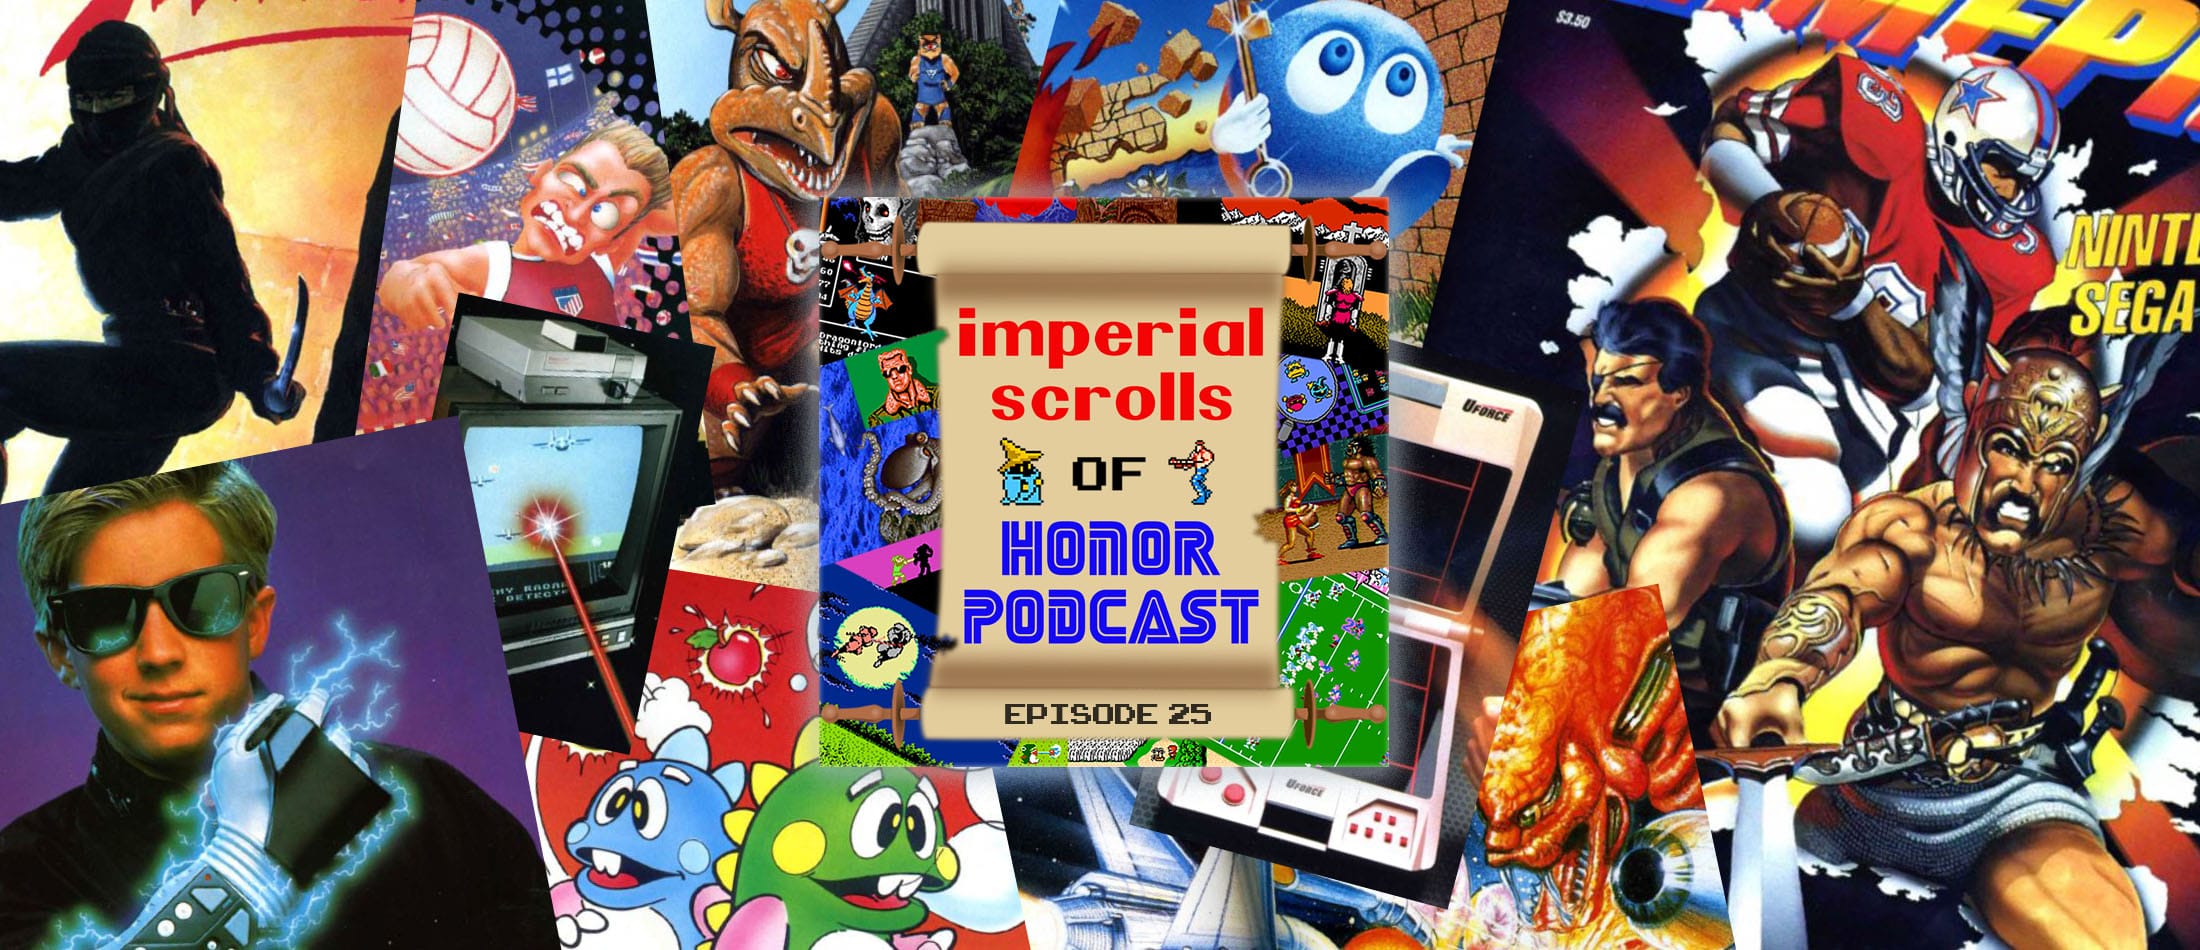 Imperial Scrolls of Honor Podcast - Episode 25 - GamePro #1